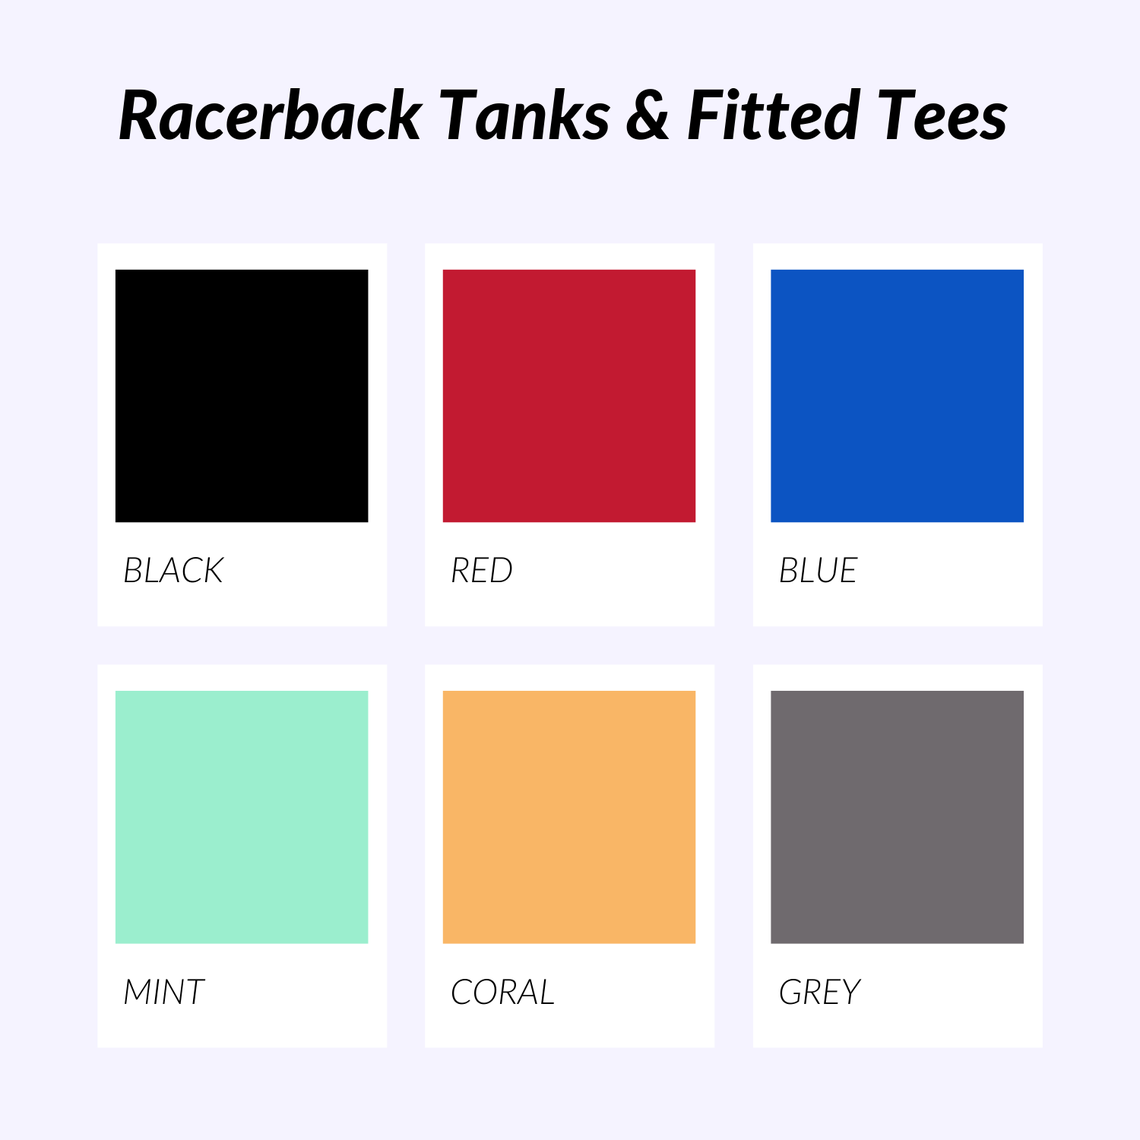 racerback tank and fitted tee colors, black, red, blue, mint, coral and grey